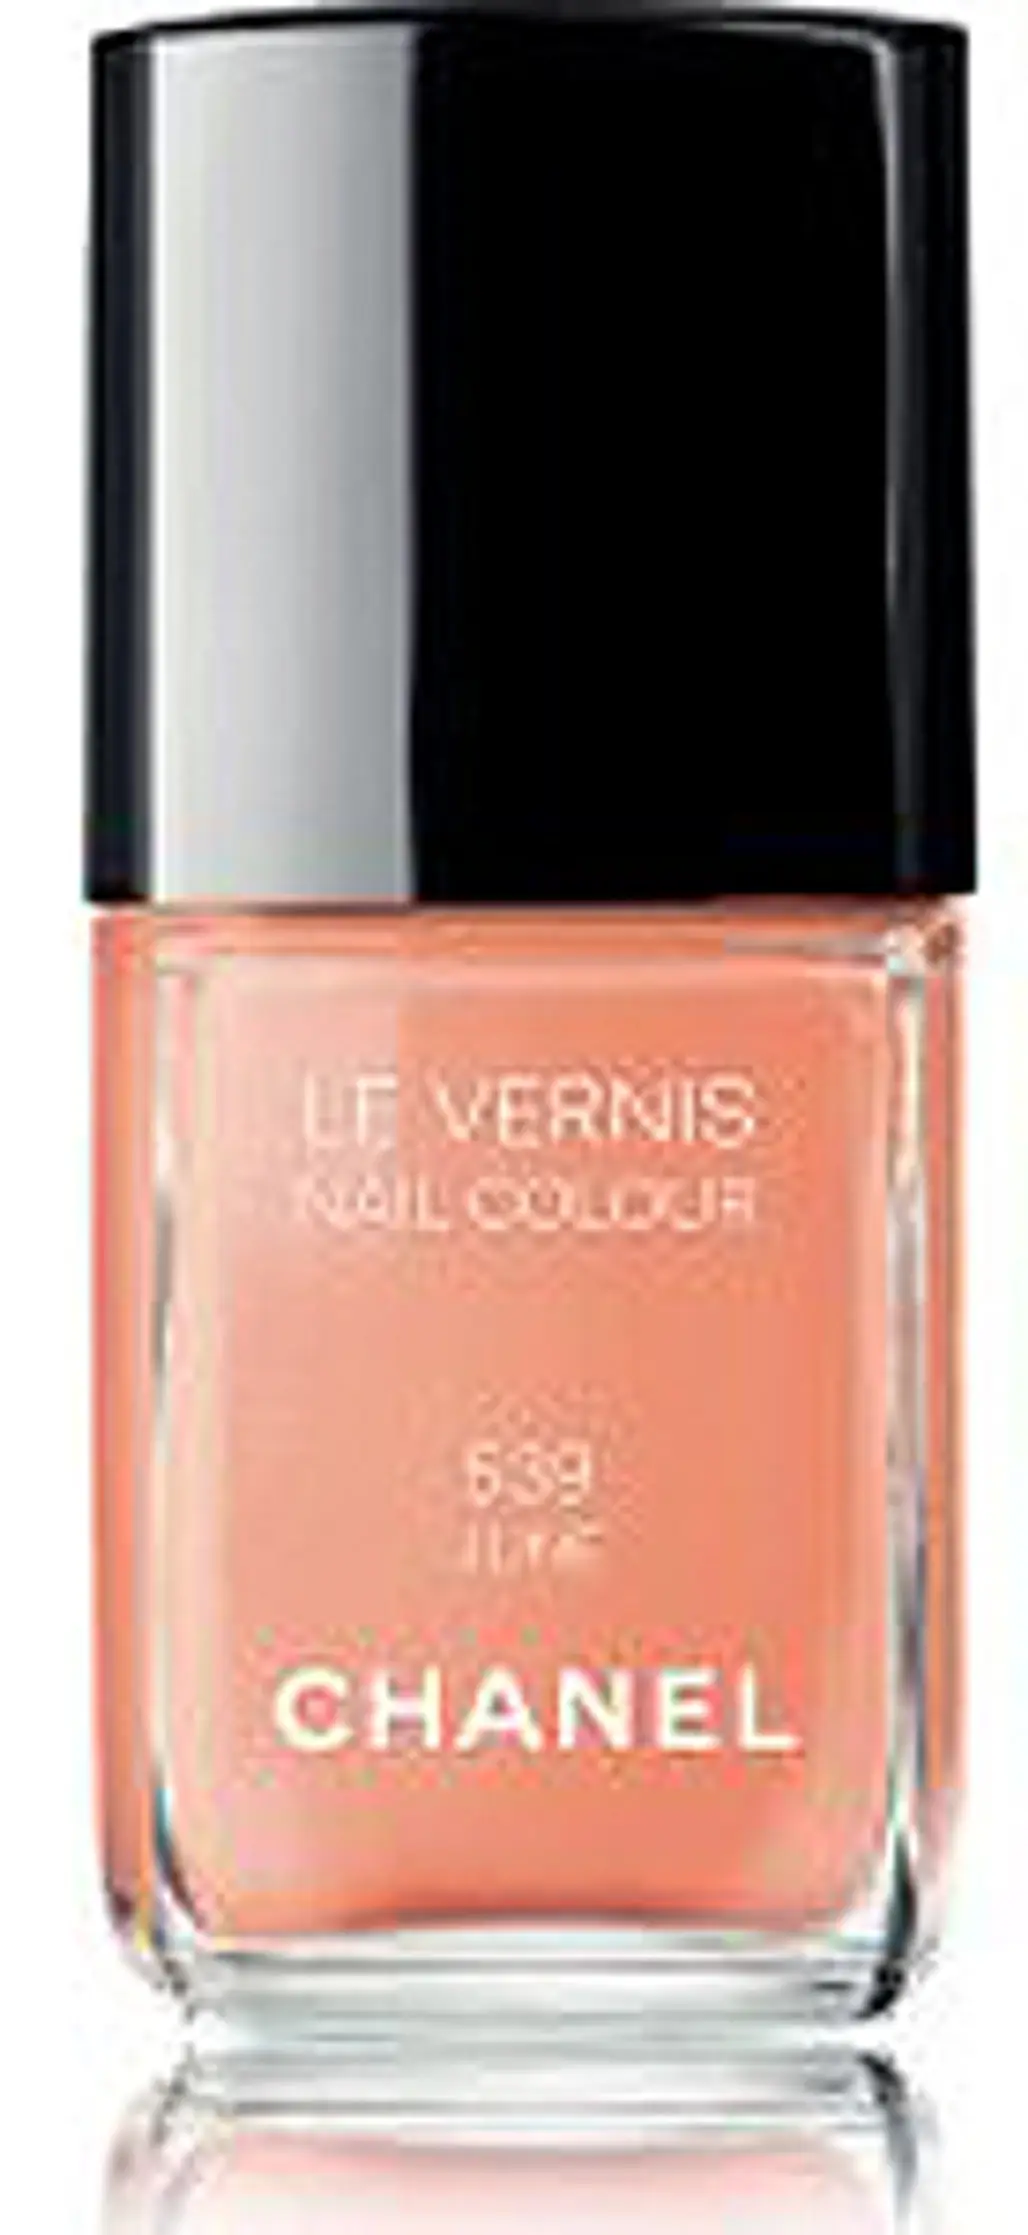 Chanel Le Vernis Nail Colour in June